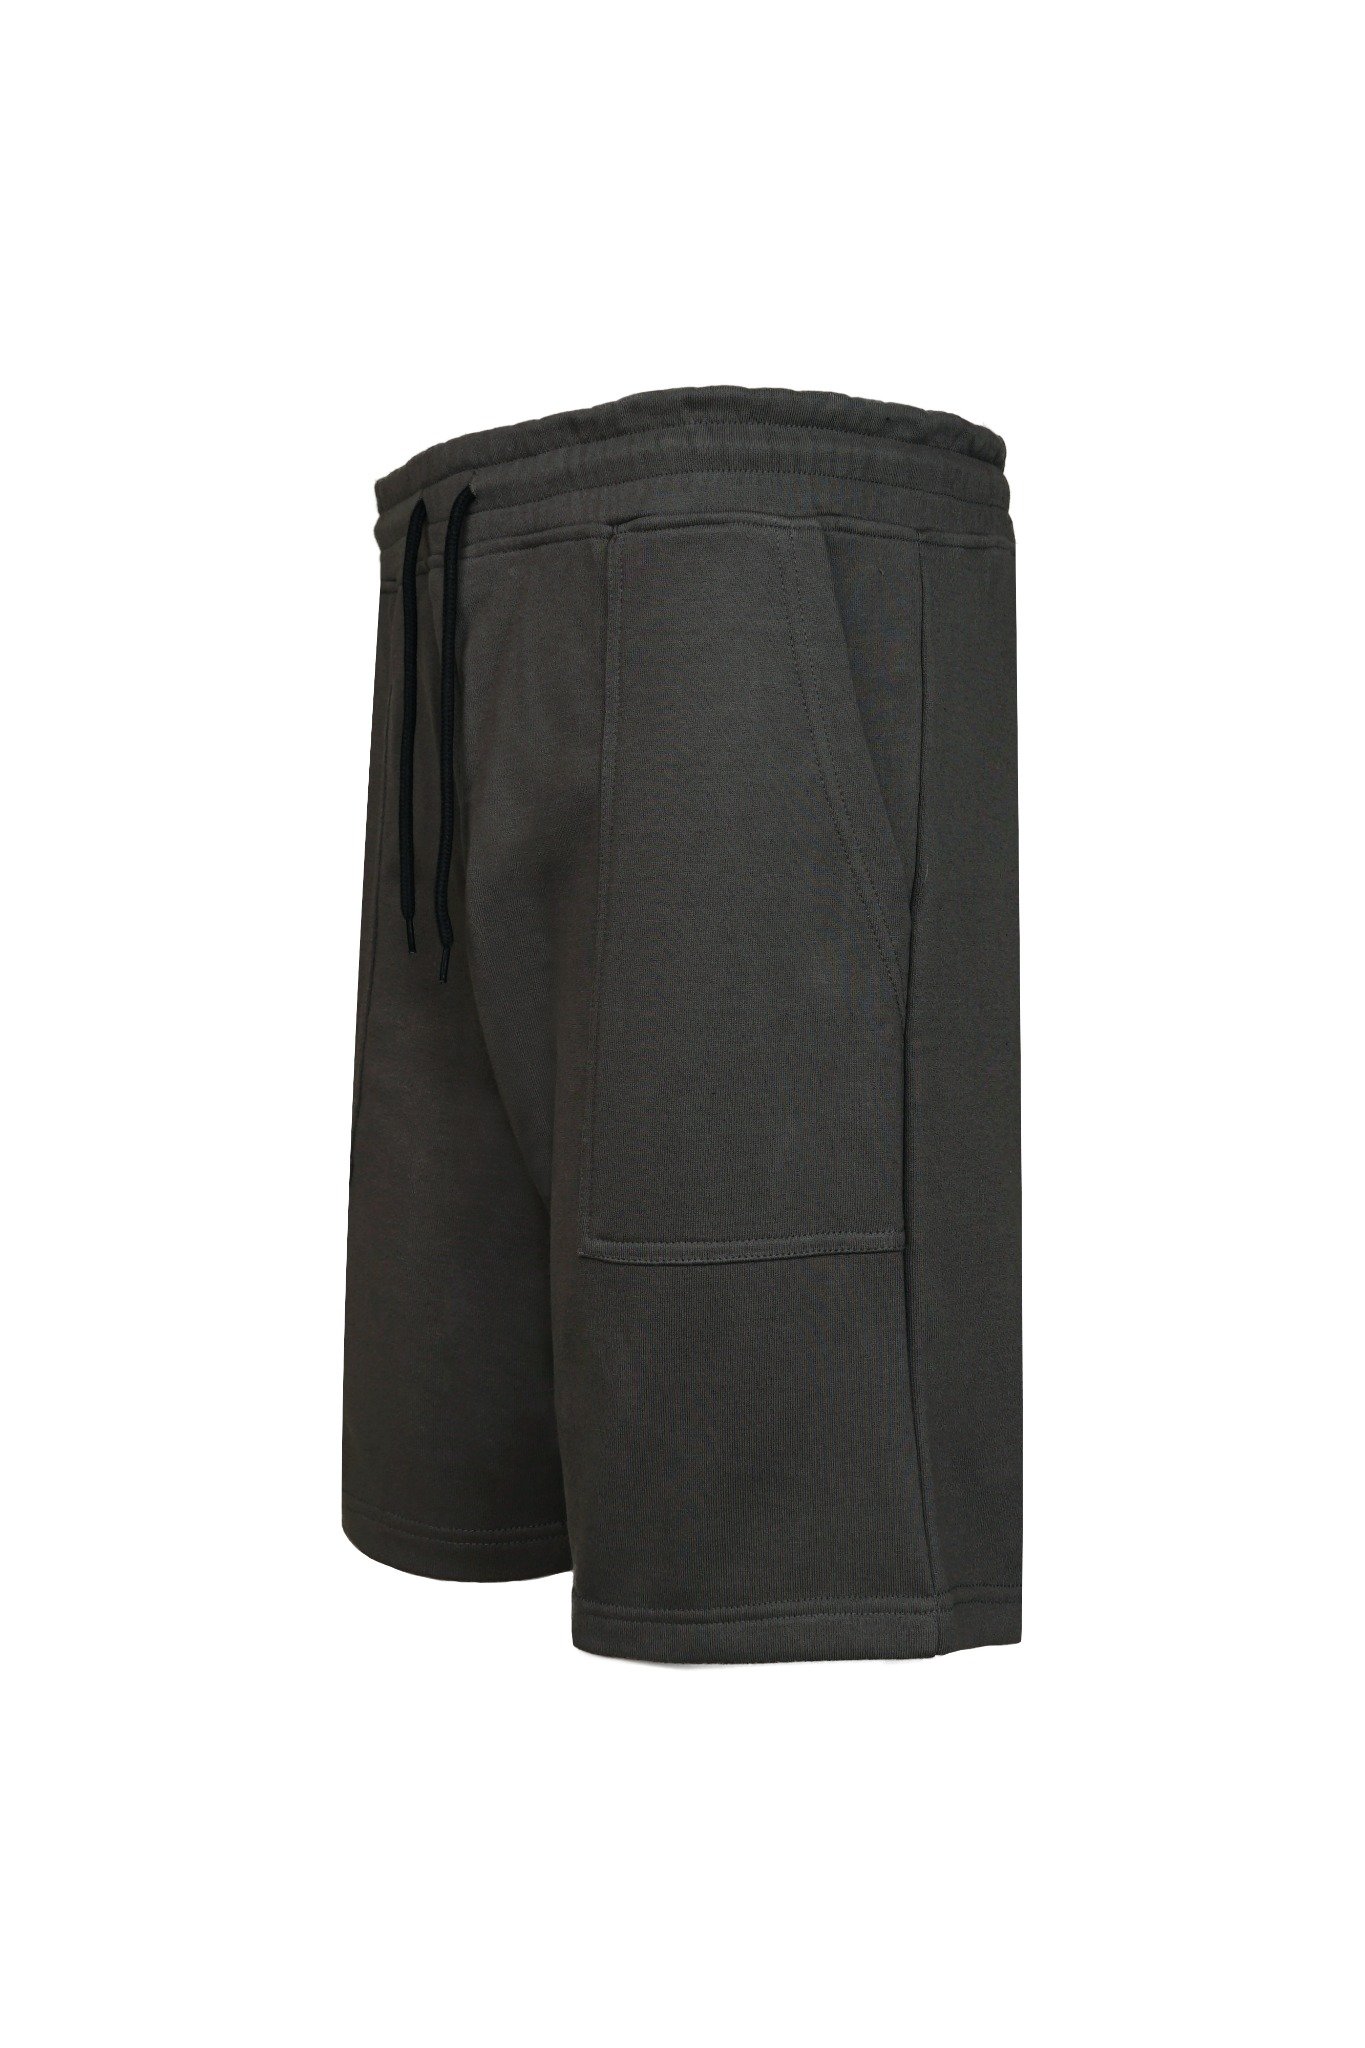  CHARCOAL RELAXED FIT SWEATSHORTS 